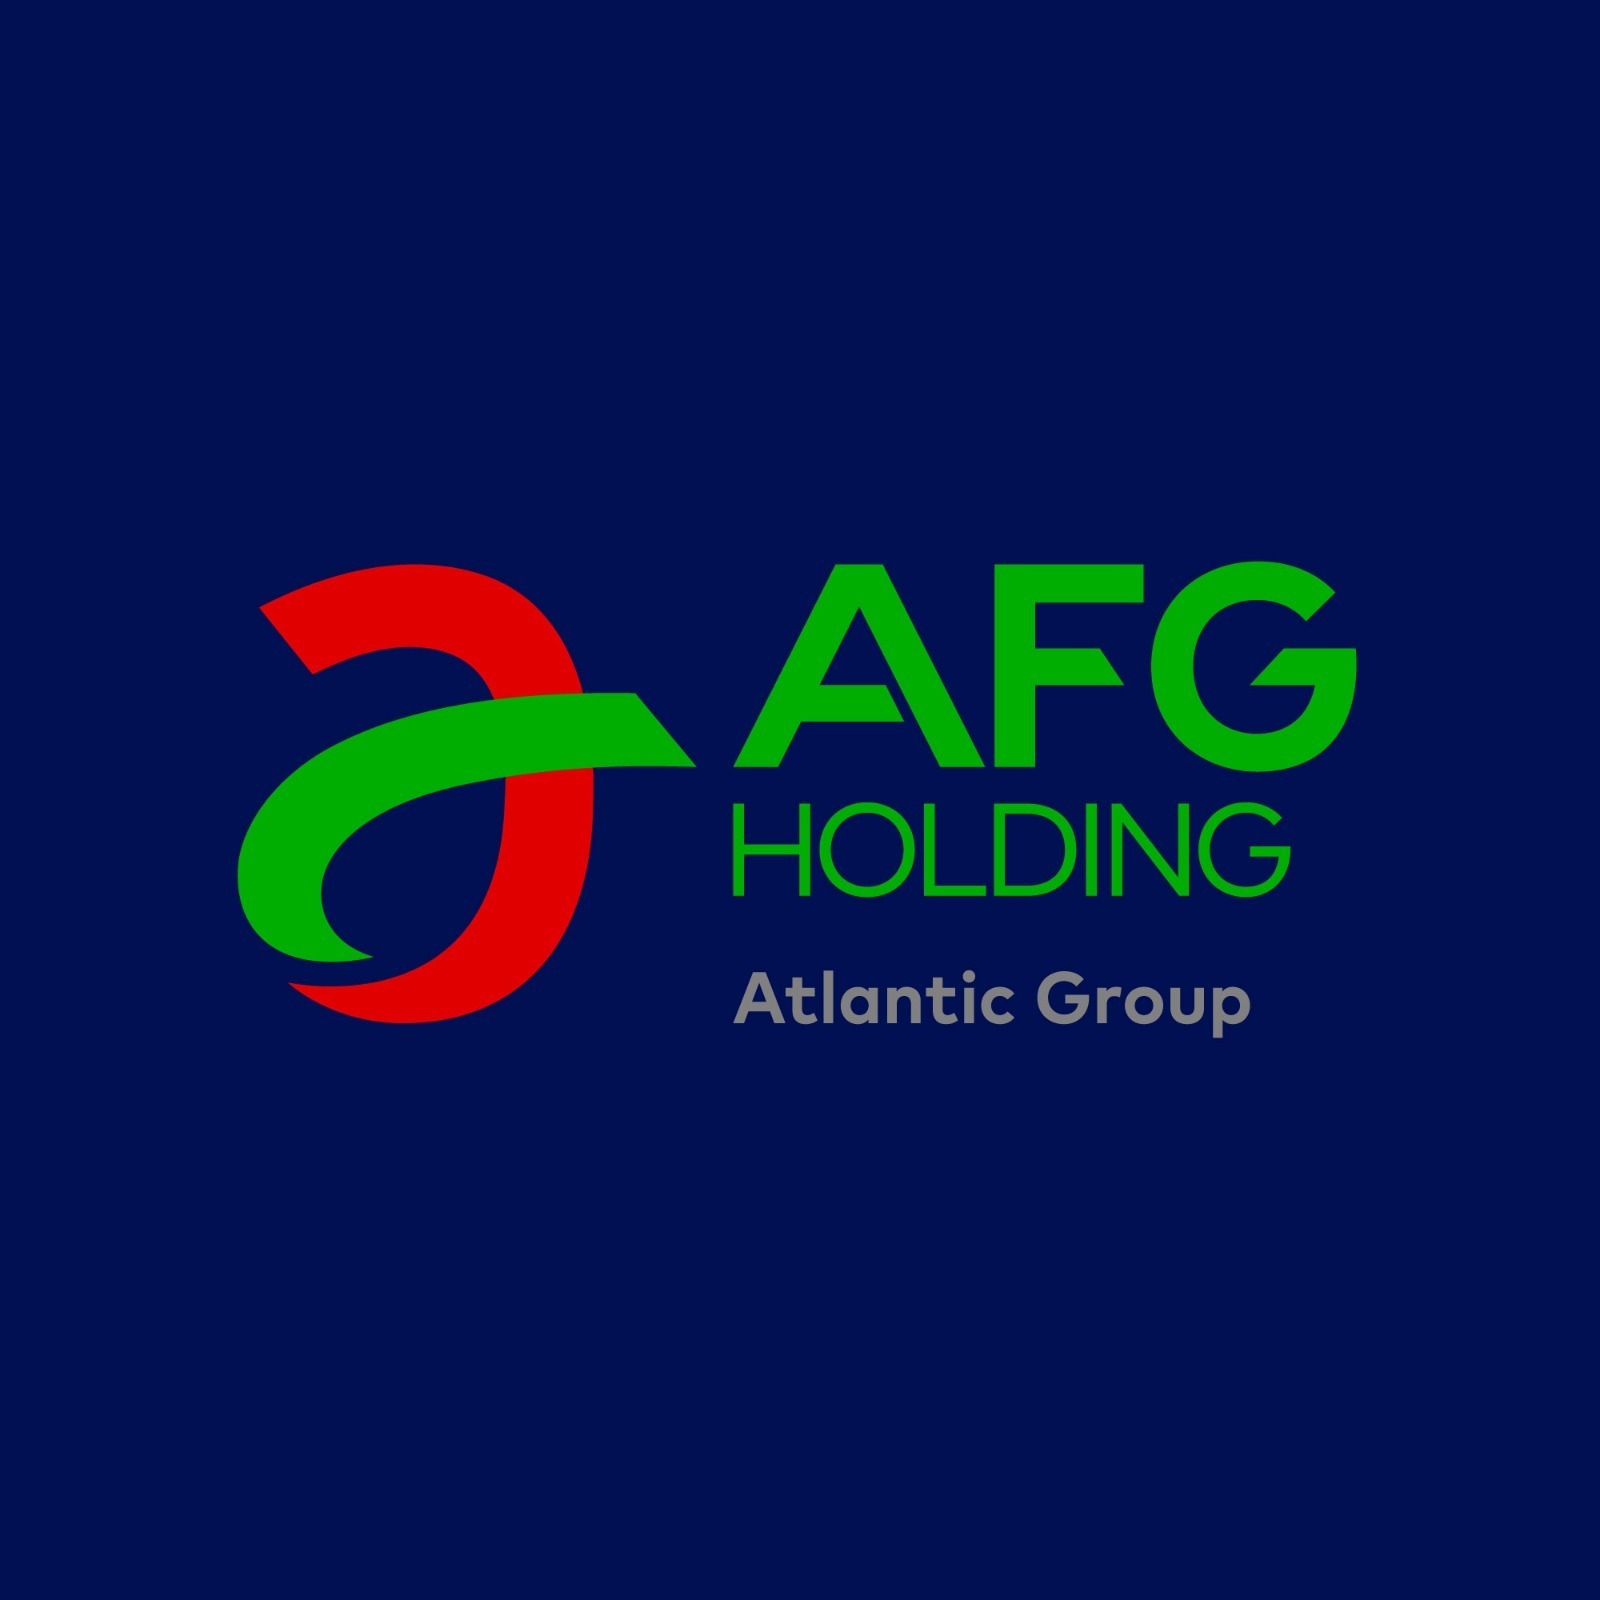 Atlantic Financial Group Holding